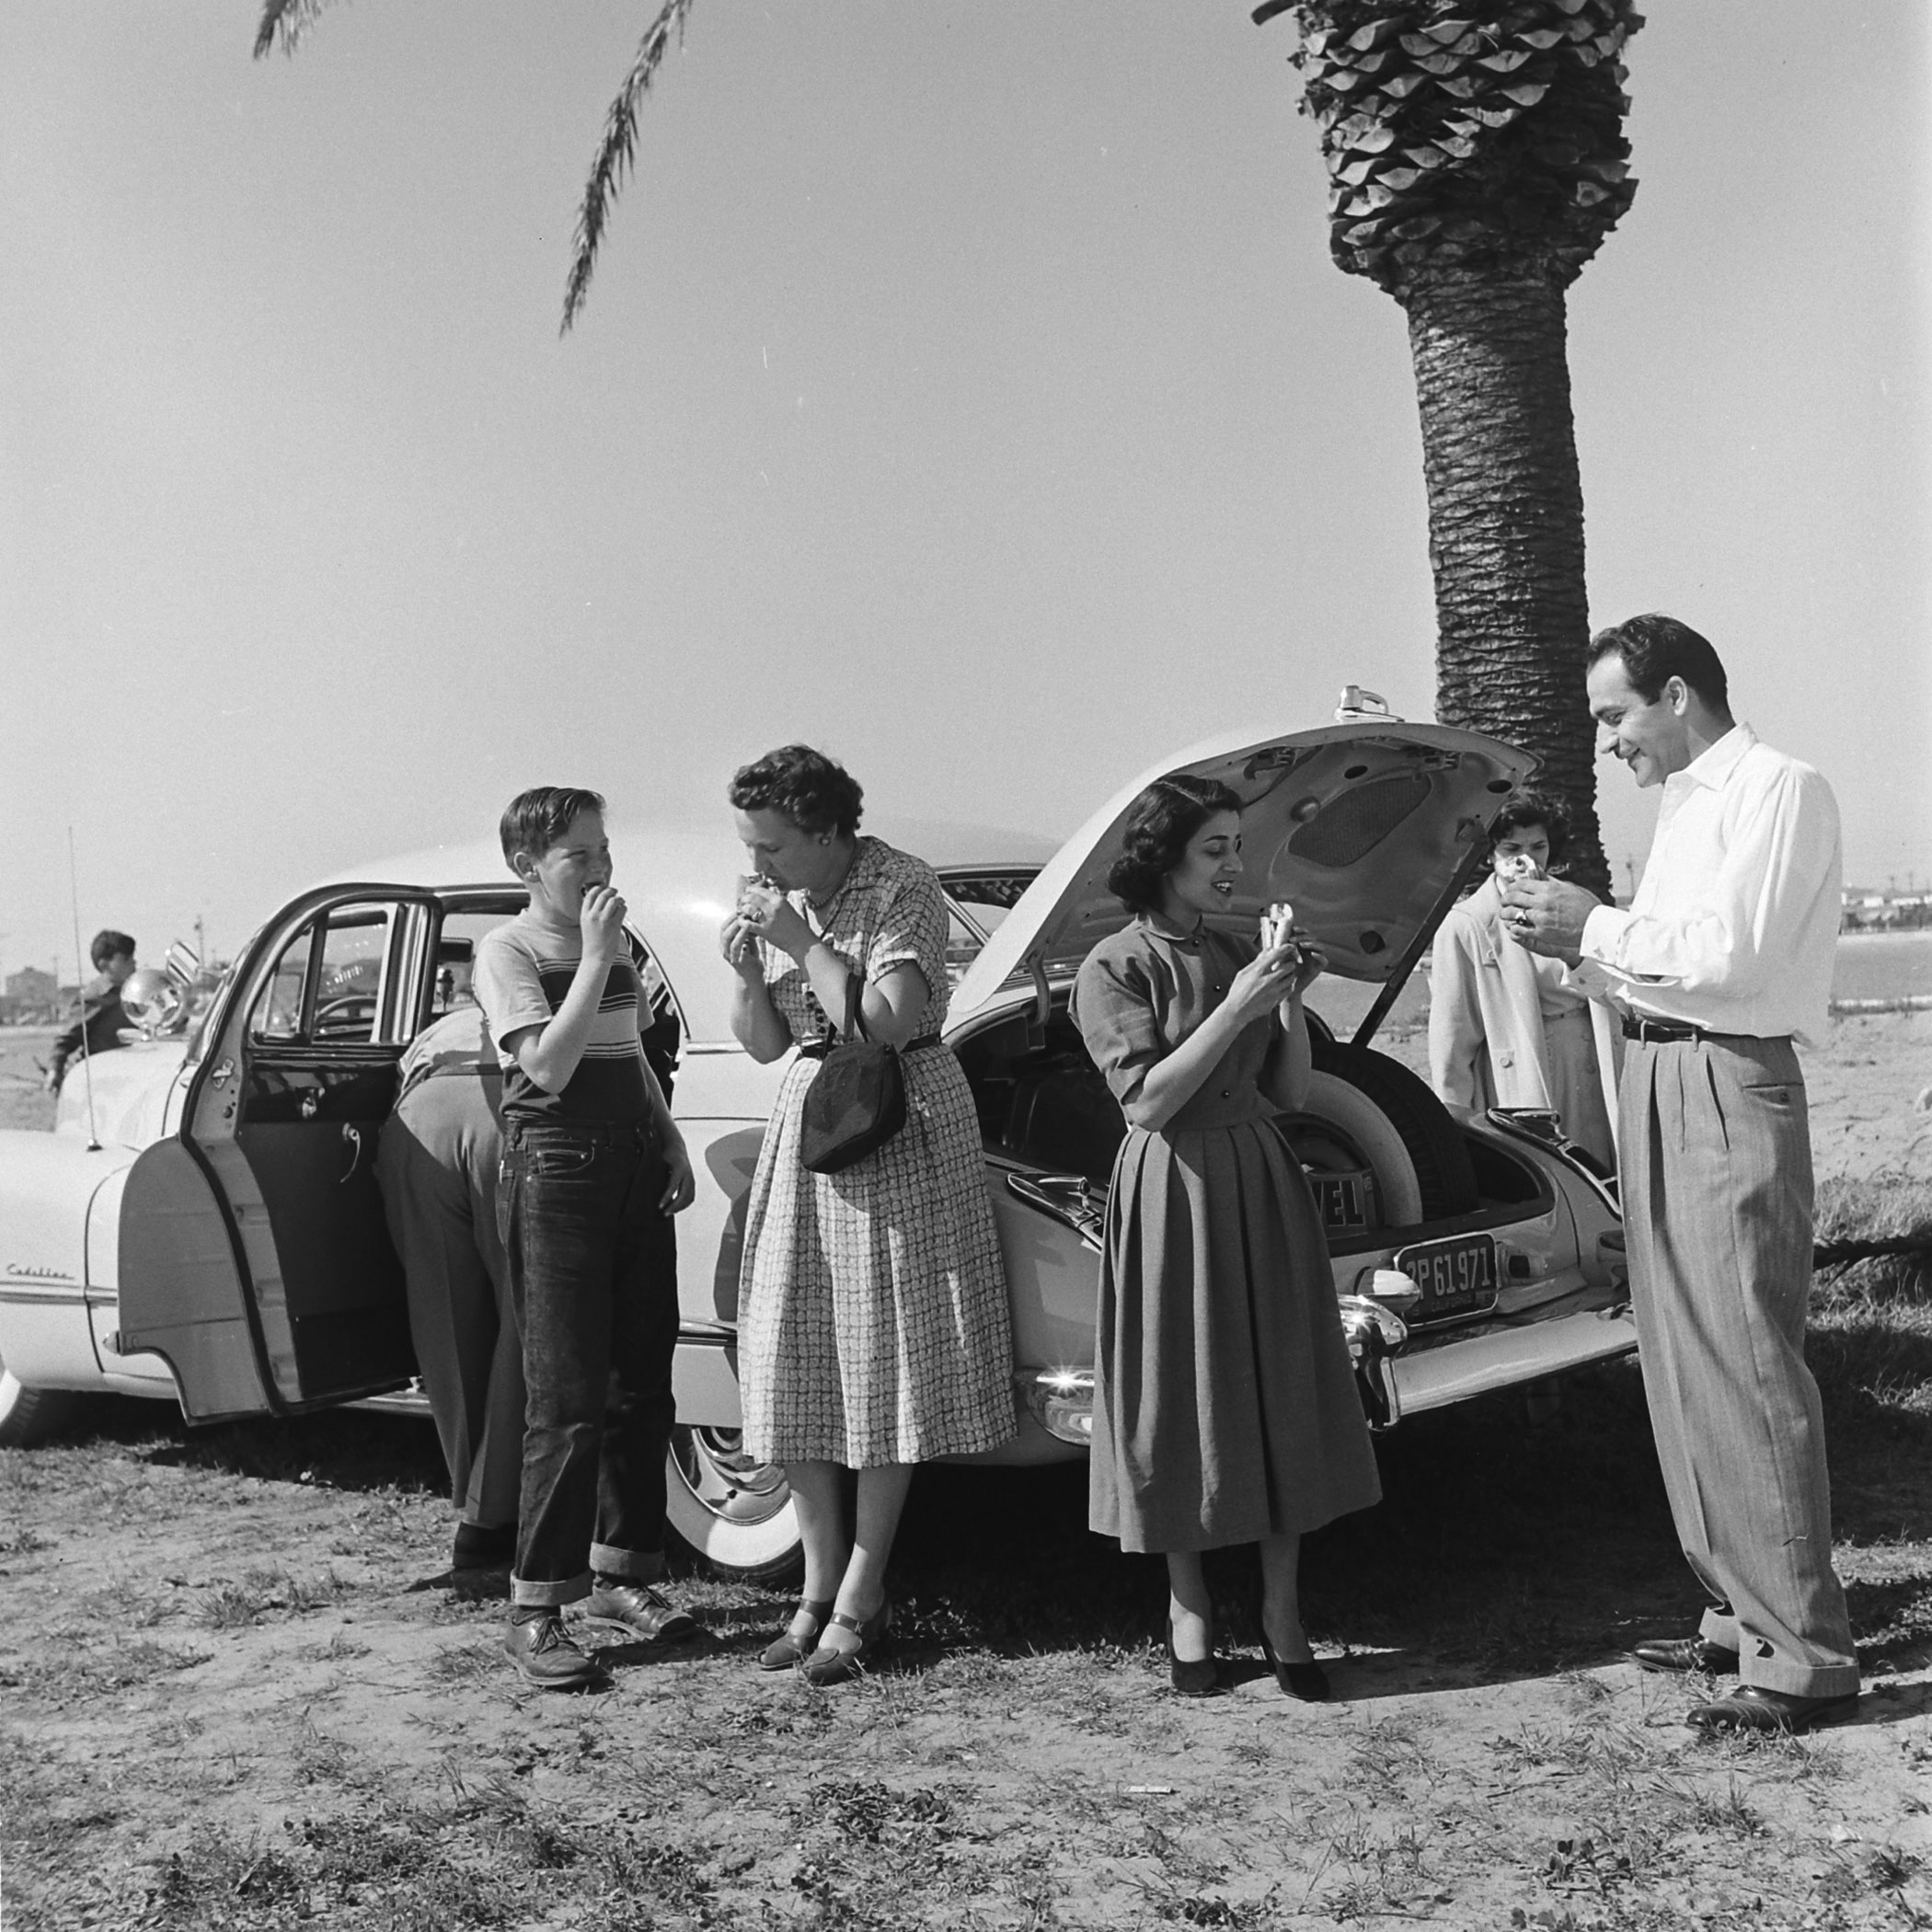 A picnic on the beach, courtesy of Louis Mattar's tricked-out 1947 Cadillac.